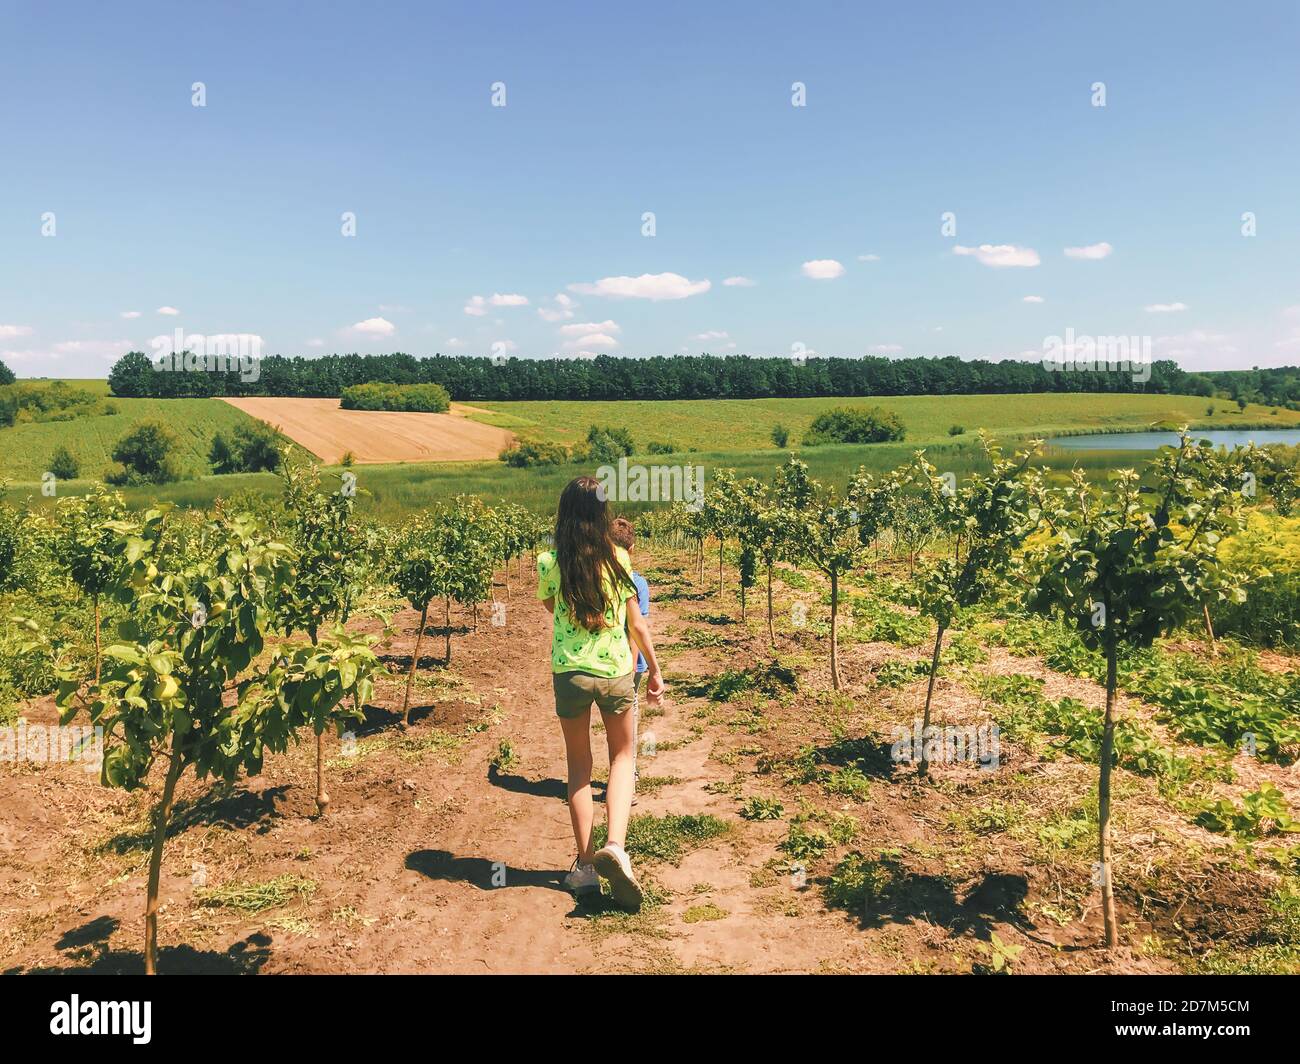 Summer garden on countryside farm: rural landscape of fruit trees cultivation and kids walking along it Stock Photo